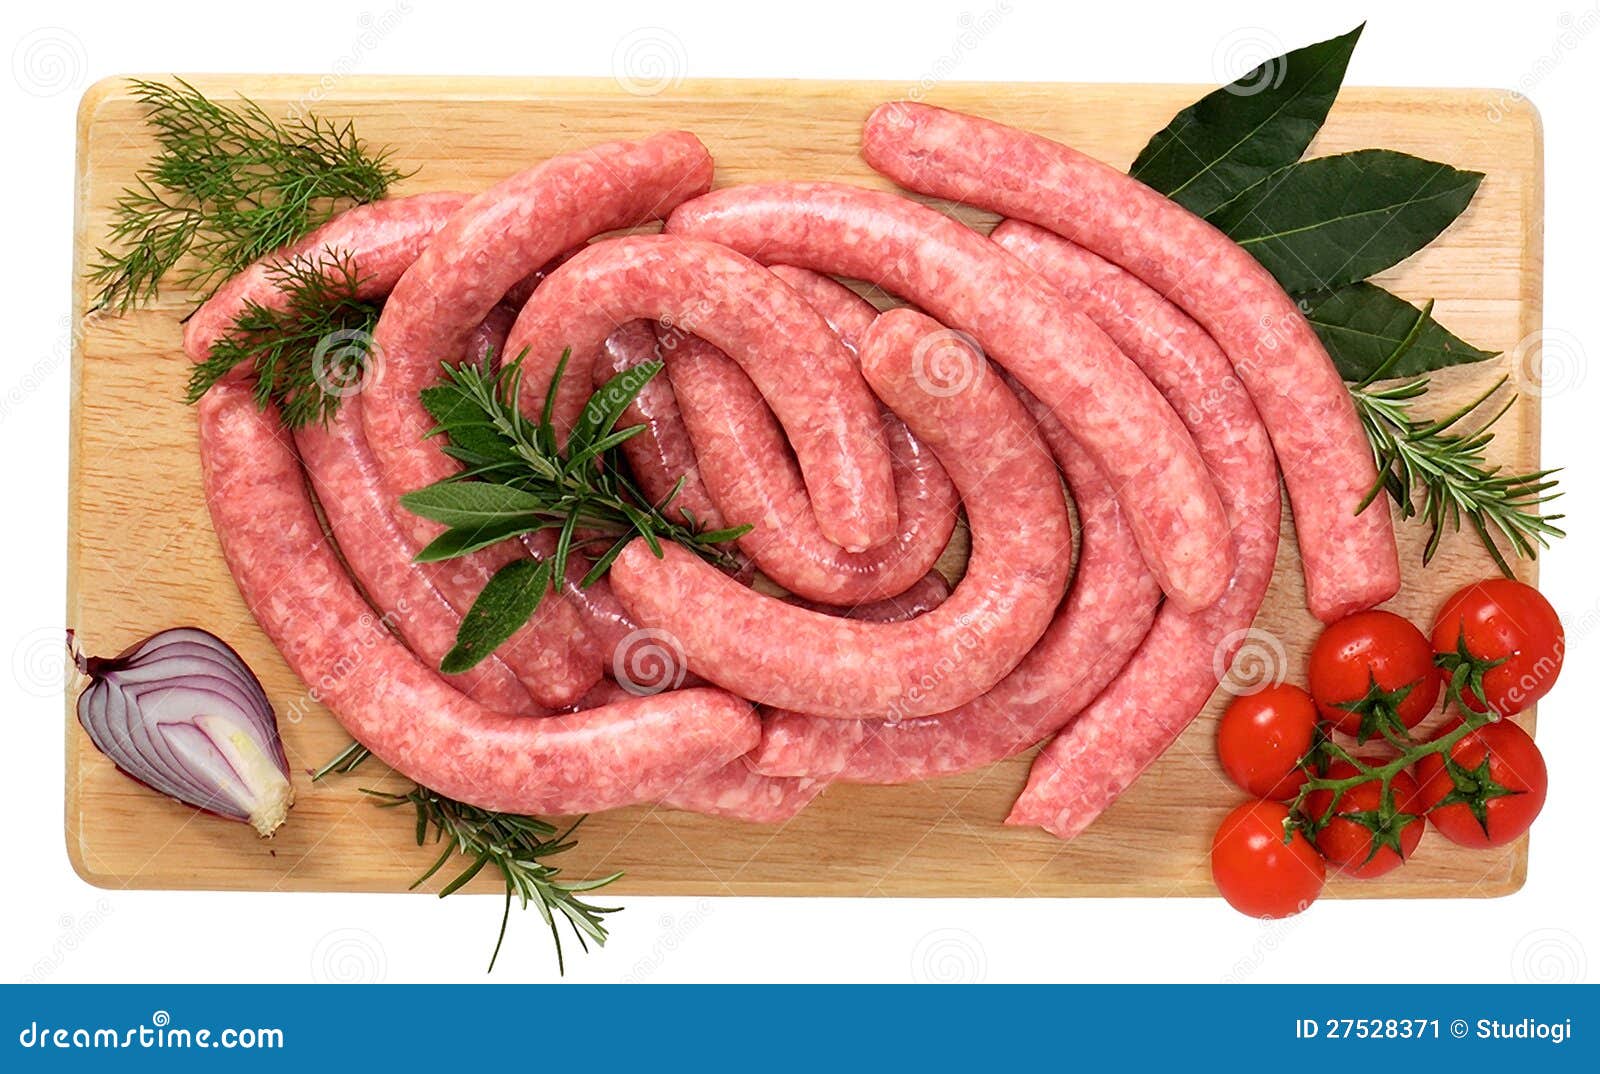 veal sausage with chicken